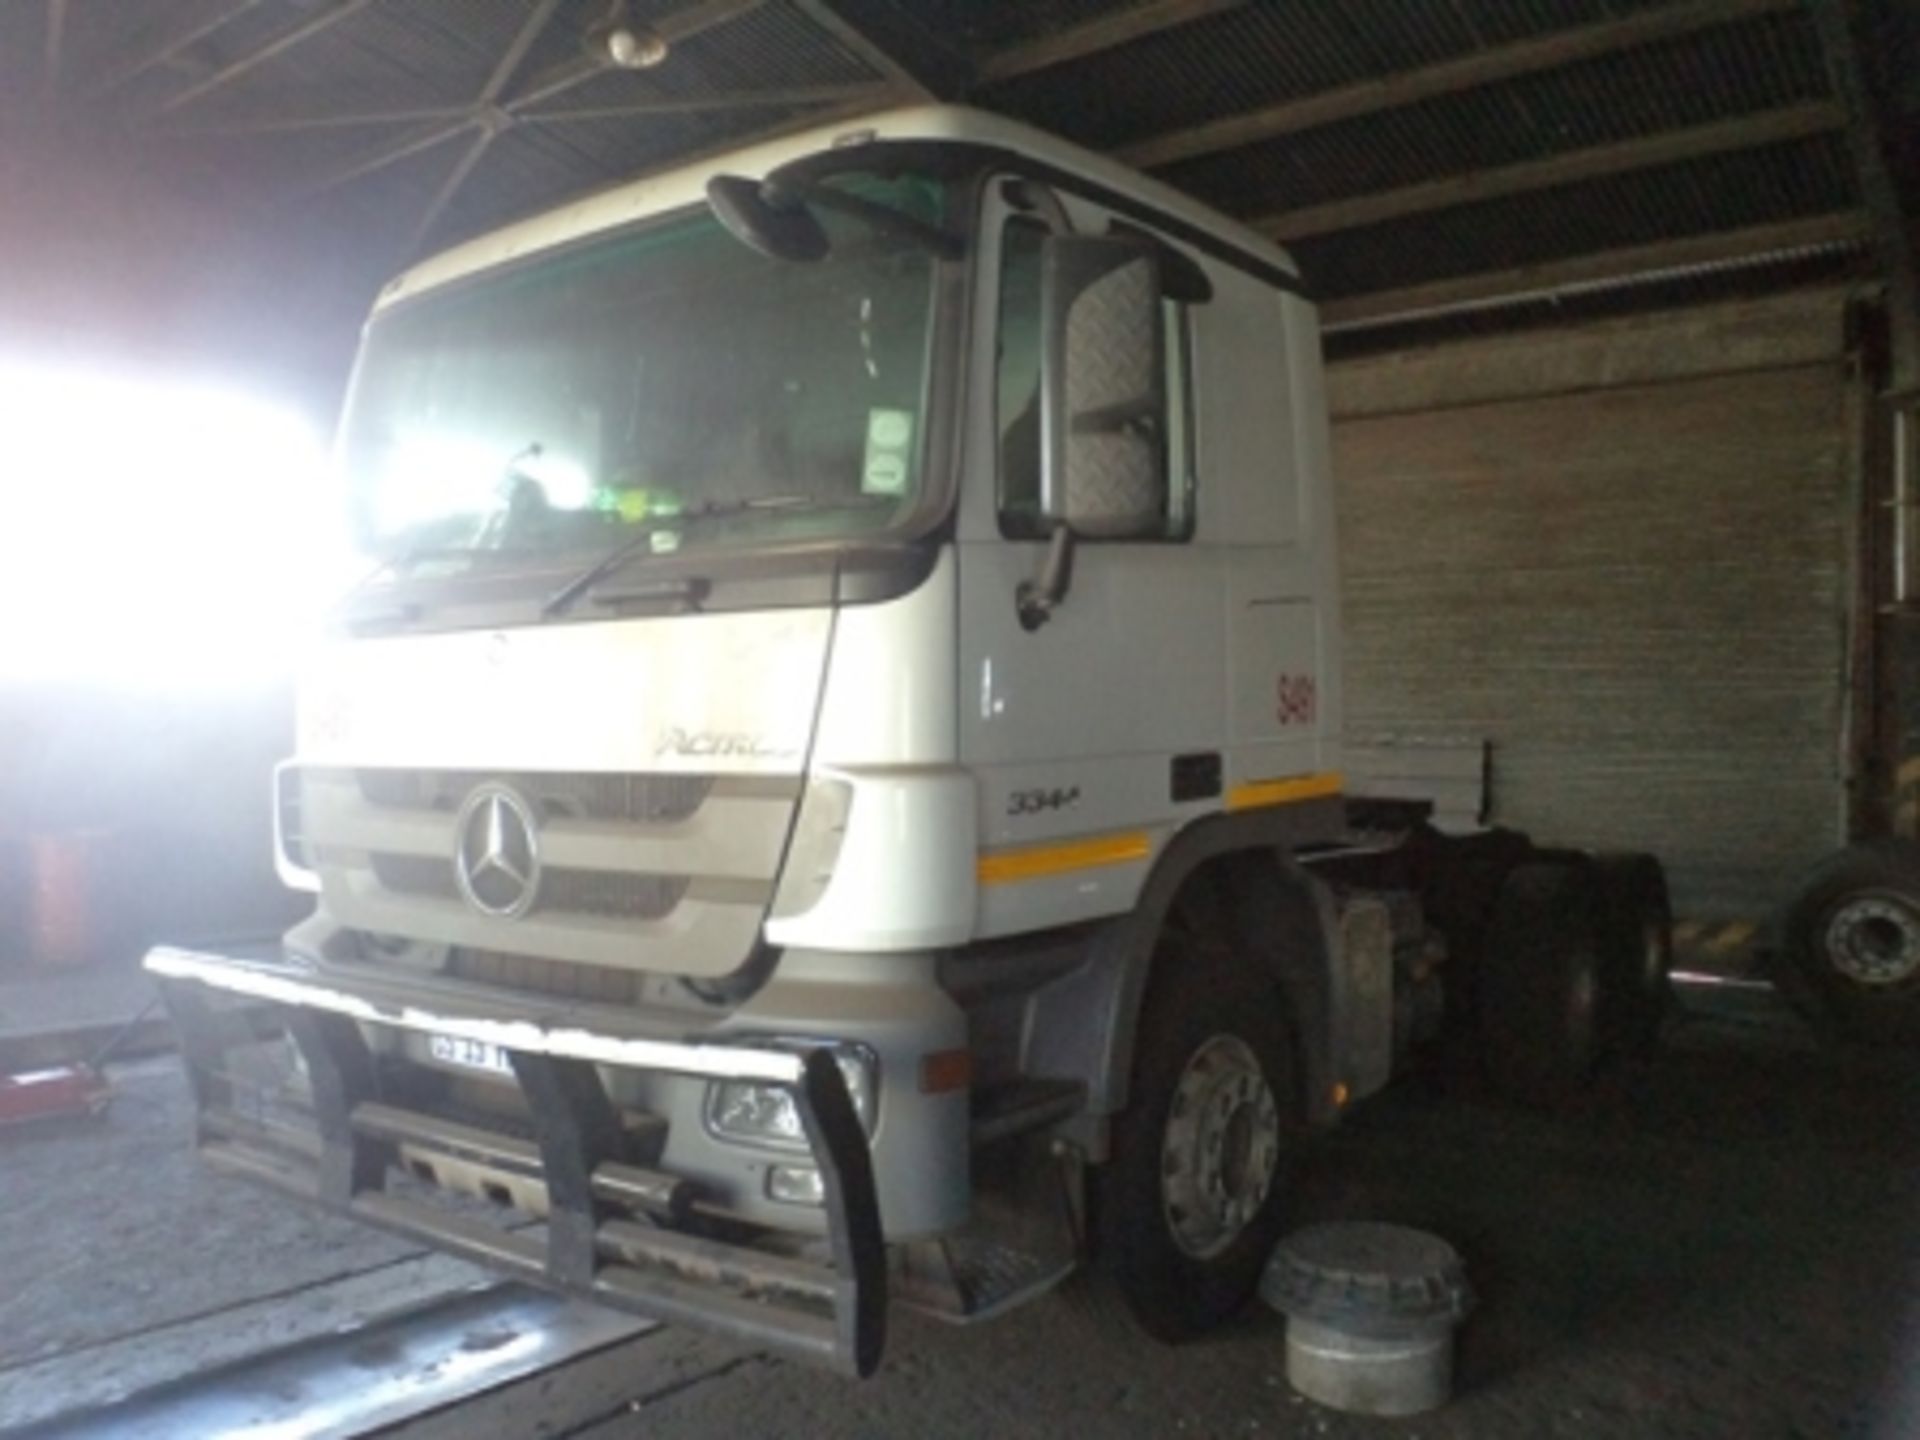 2013 MERCEDES-BENZ ACTROS 3344S/33 D/AXLE HORSE - 14 DAY PAPER DELAY, KM: 19307 - Image 2 of 6